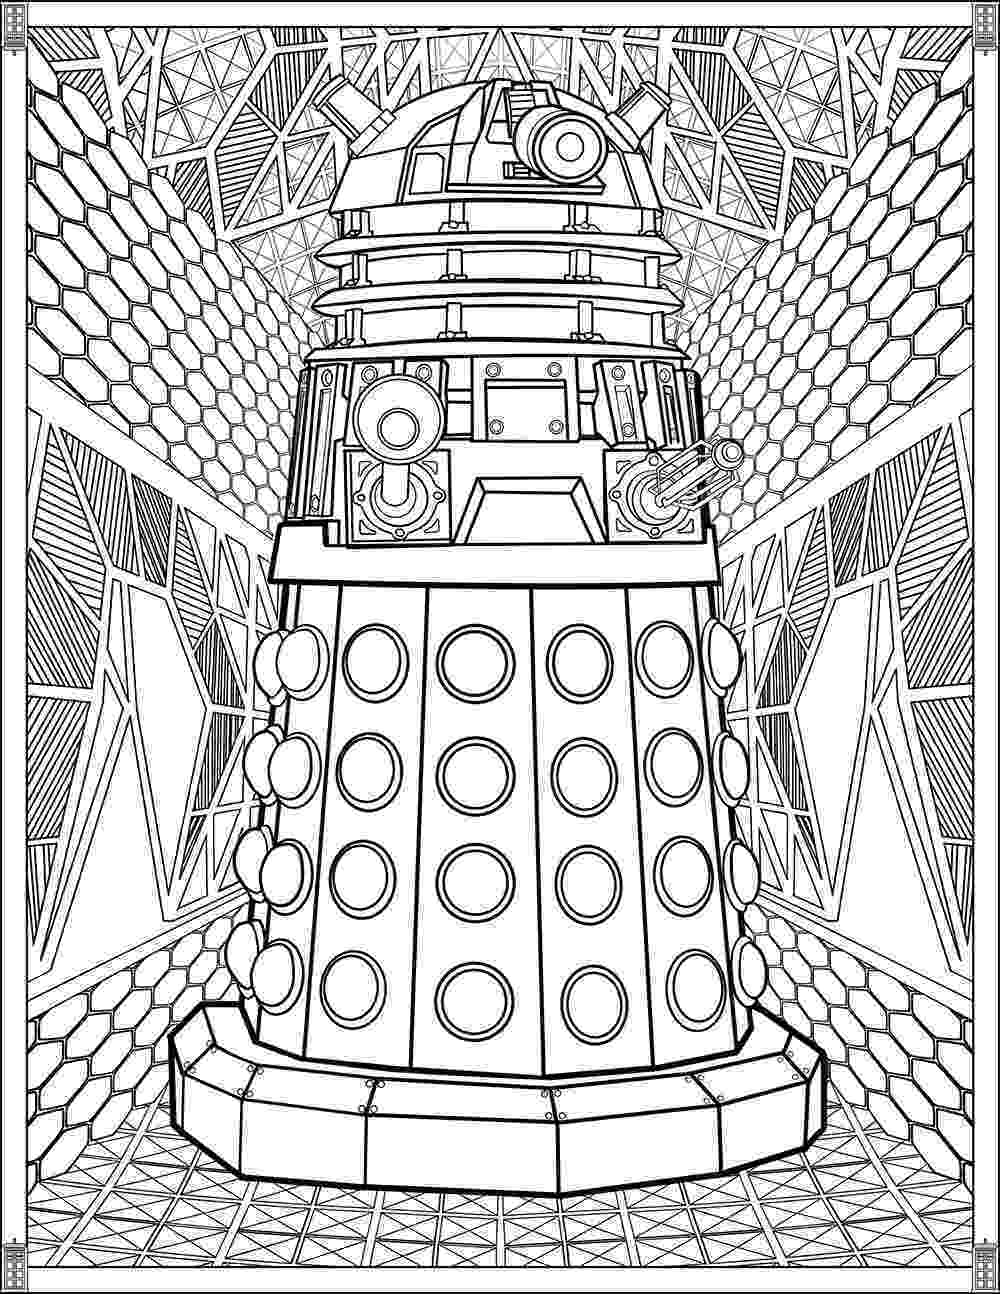 dalek coloring page doctor who wibbly wobbly timey wimey coloring pages dalek coloring page 